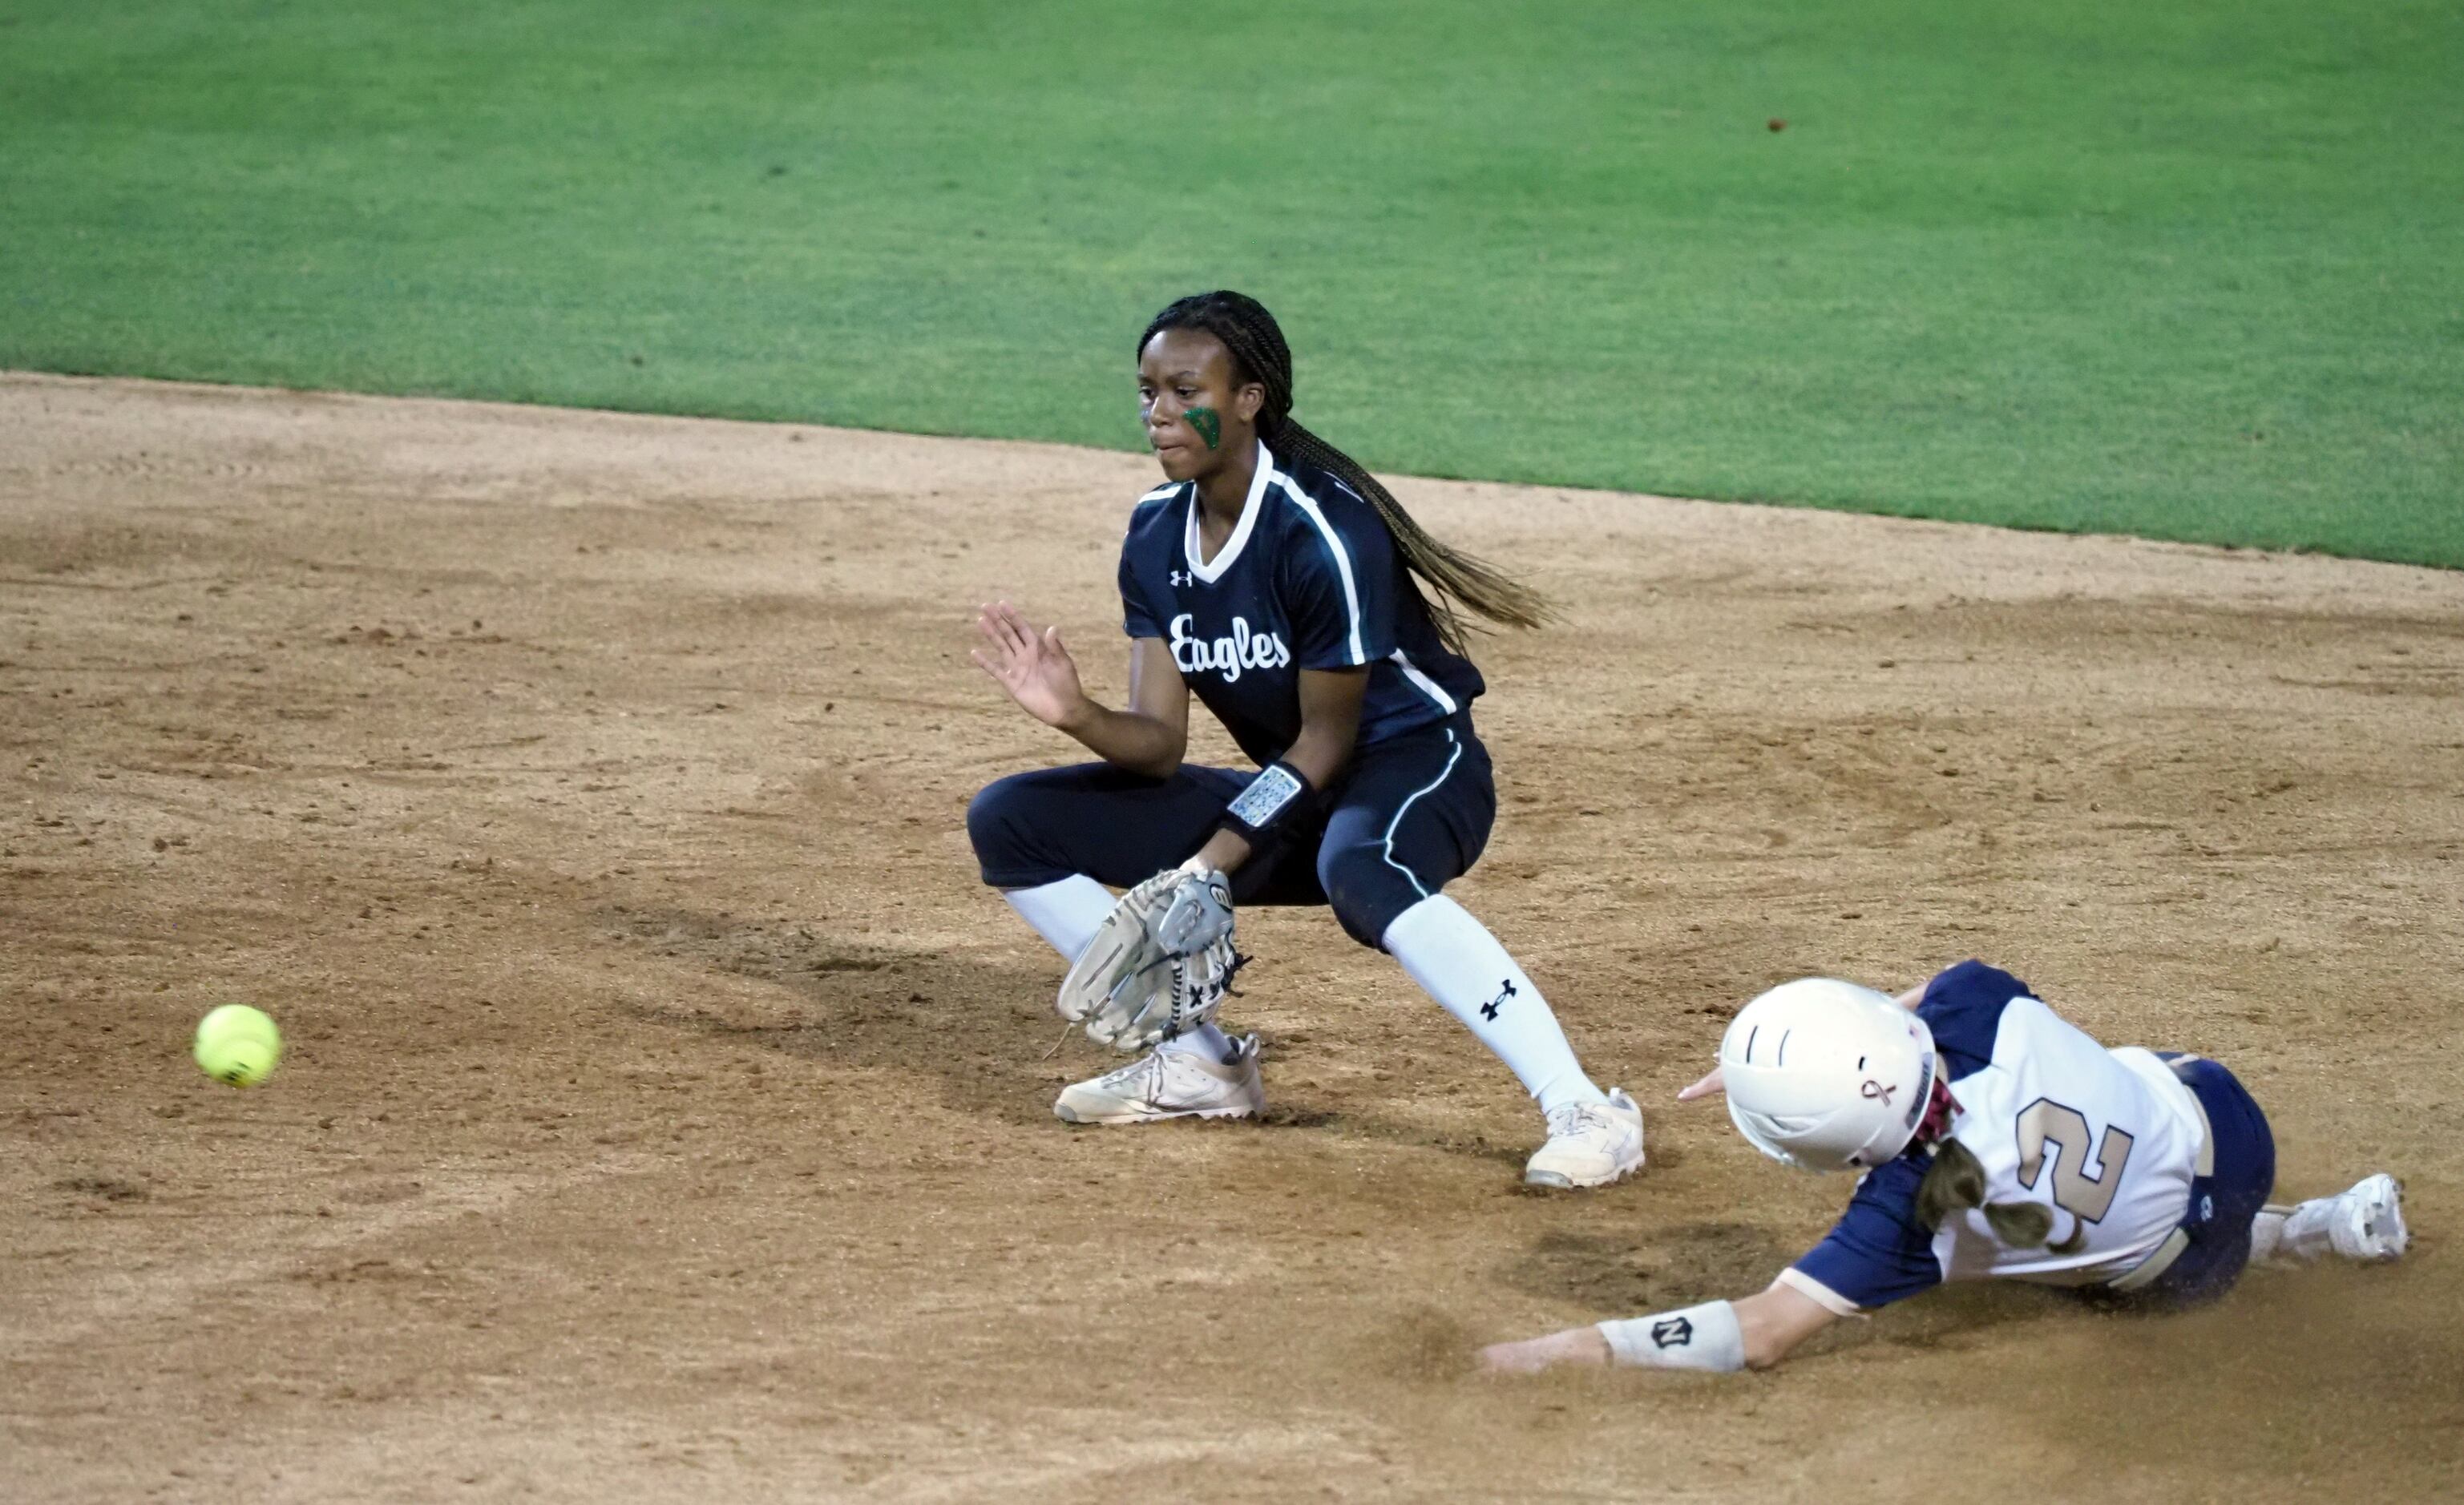 Mansfield Lake Ridge short stop Kassidy Chance 
(Left) attempts to make the play for an out...